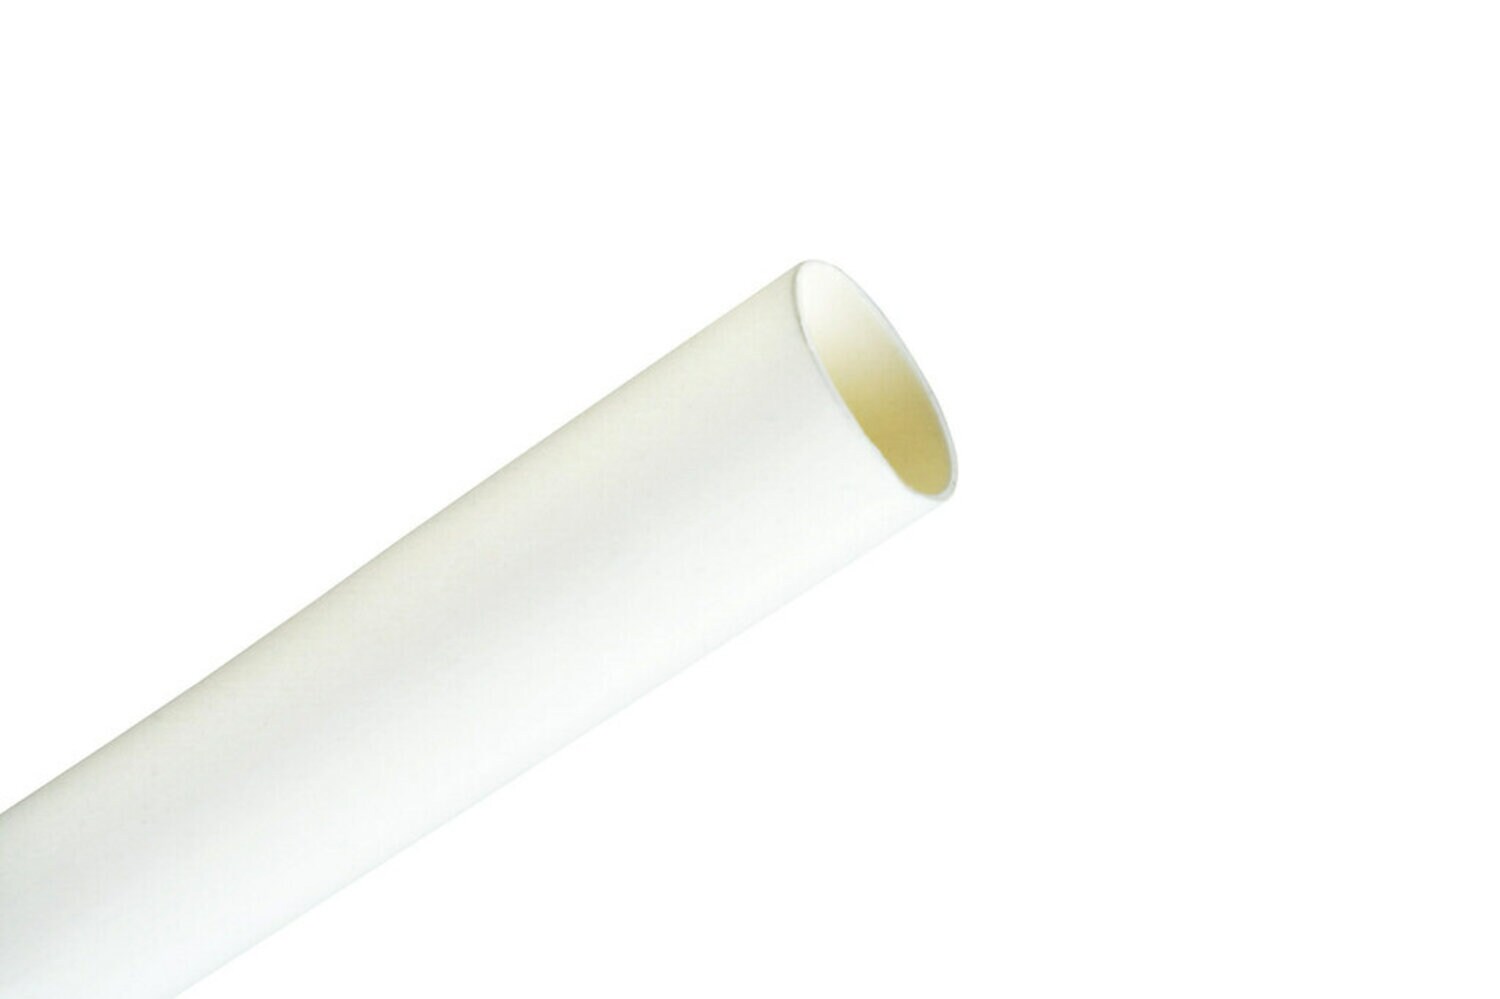 7010320992 - 3M Heat Shrink Thin-Wall Tubing FP-301-1/16-48"-White-250 Pcs, 48 in
Length sticks, 250 pieces/case